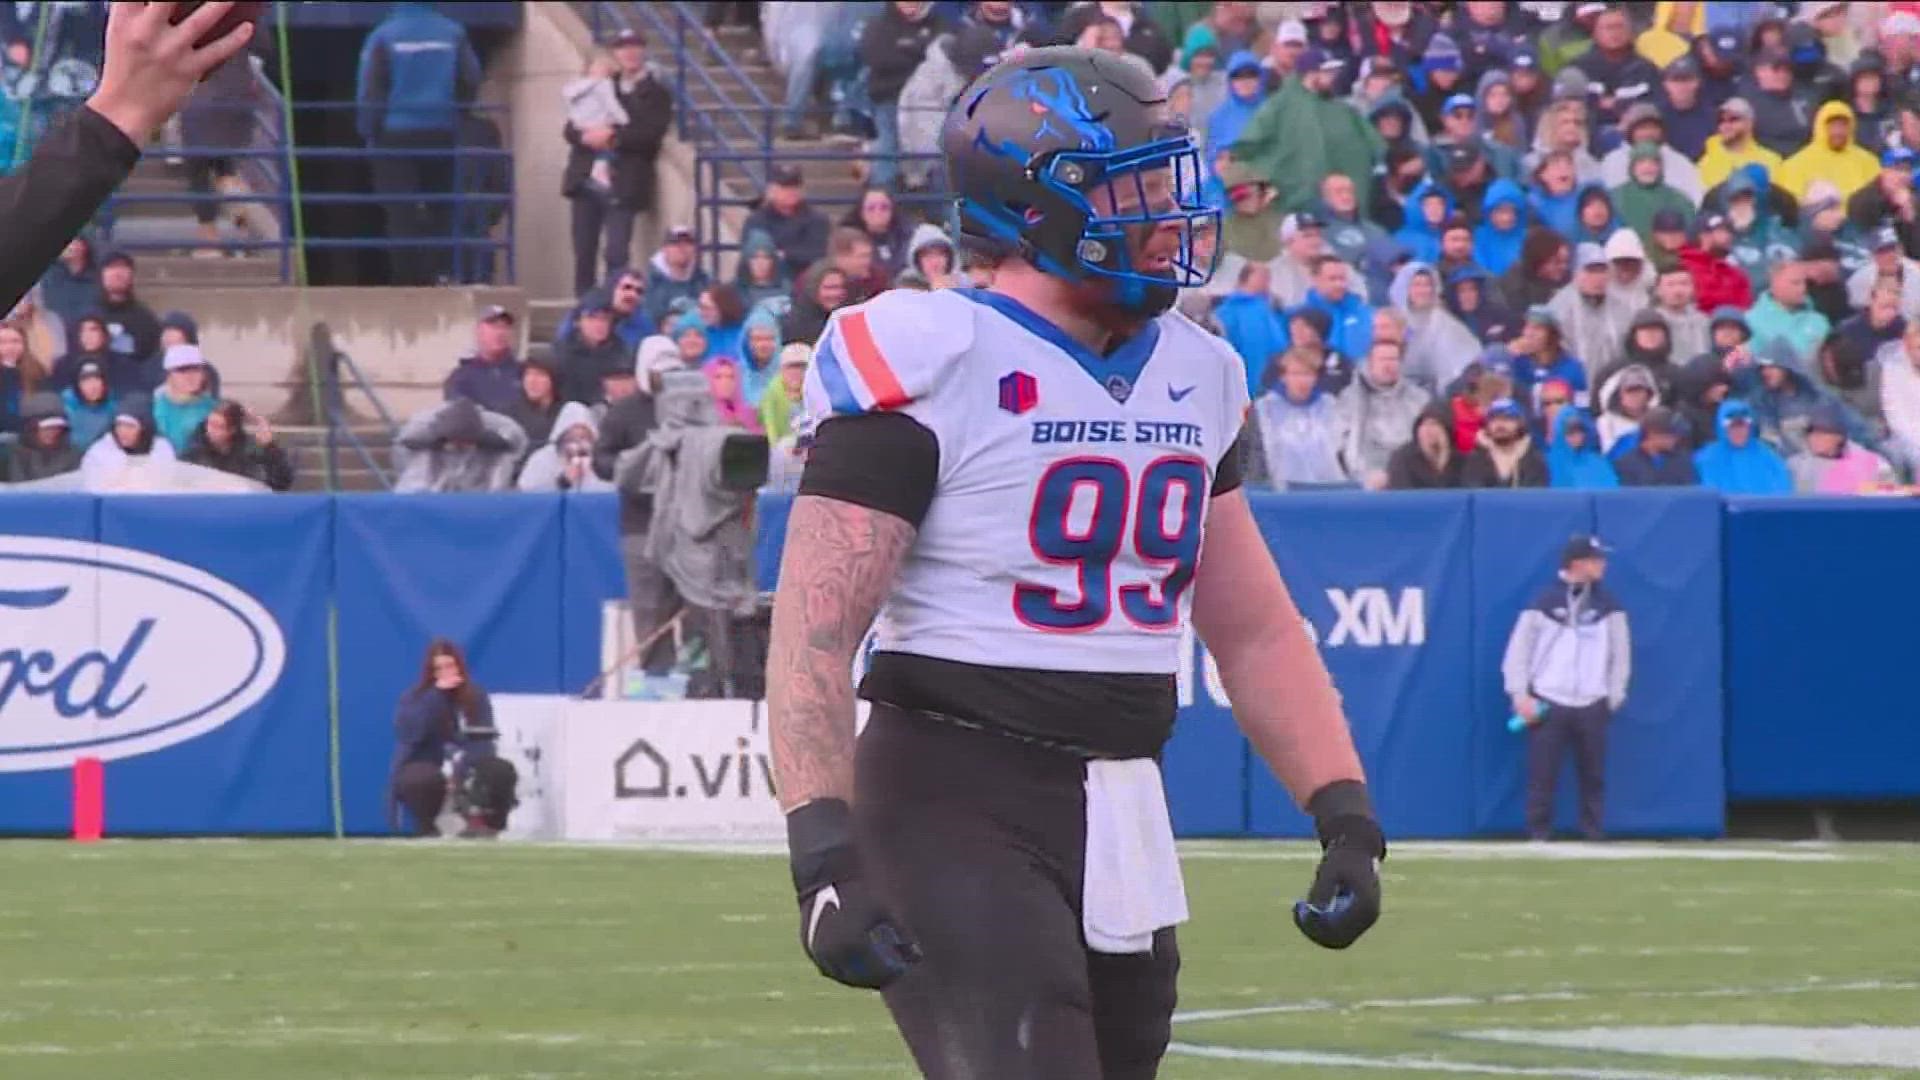 The preseason honors continue to roll in for Boise State defensive tackle Scott Matlock. The Homedale native is a candidate for the 2022 Chuck Bednarik Award.